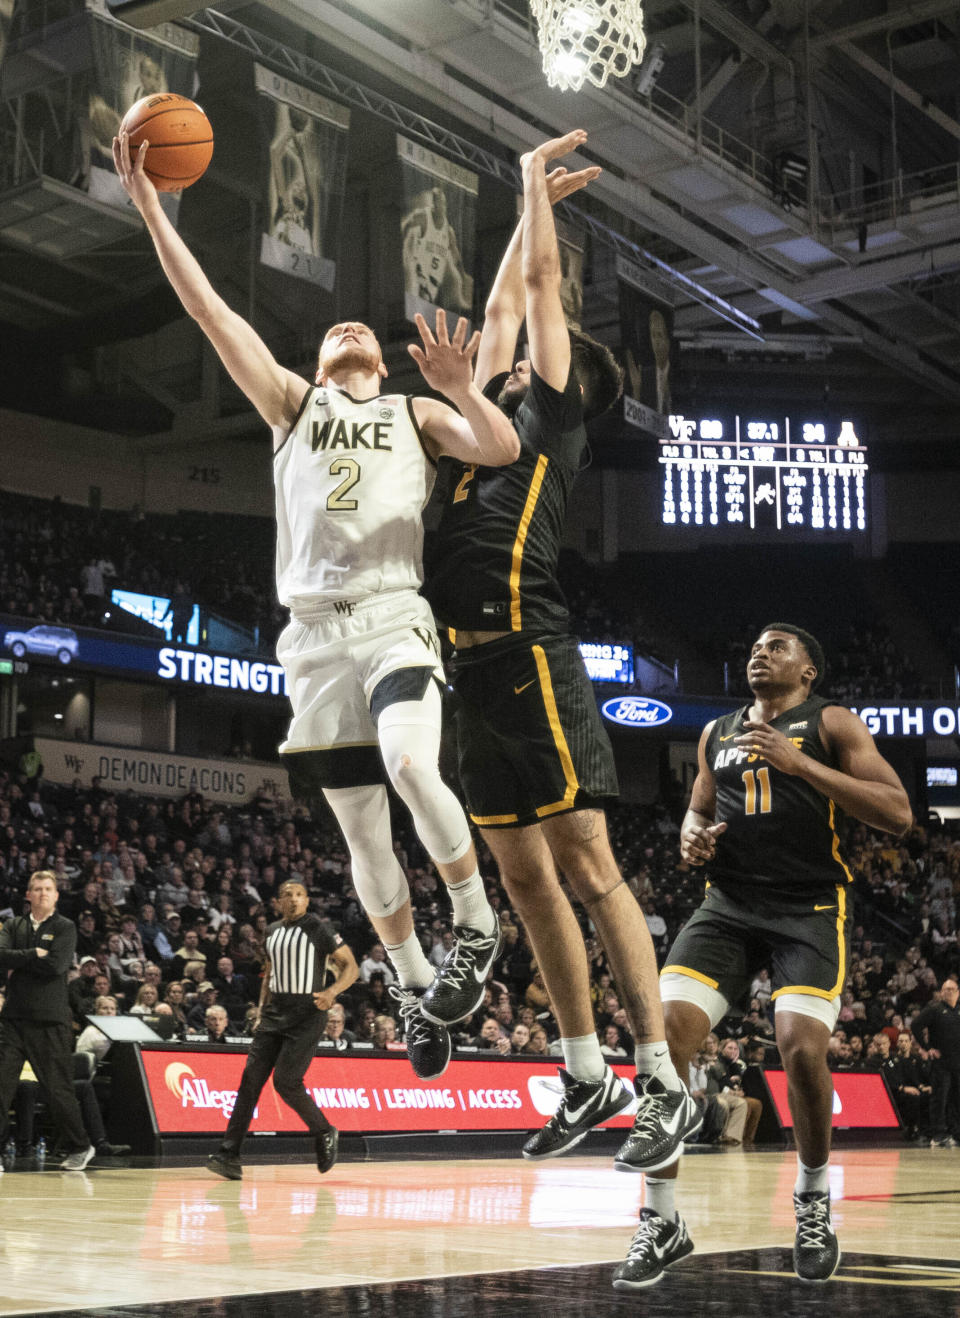 Wake Forest guard Cameron Hildreth (2) goes in for a layup with pressure from Appalachian State forward Christopher Mantis (2) in the first half of an NCAA college basketball game on Wednesday, Dec. 14, 2022, at Joel Coliseum in Winston-Salem, N.C. (Allison Lee Isley/The Winston-Salem Journal via AP)